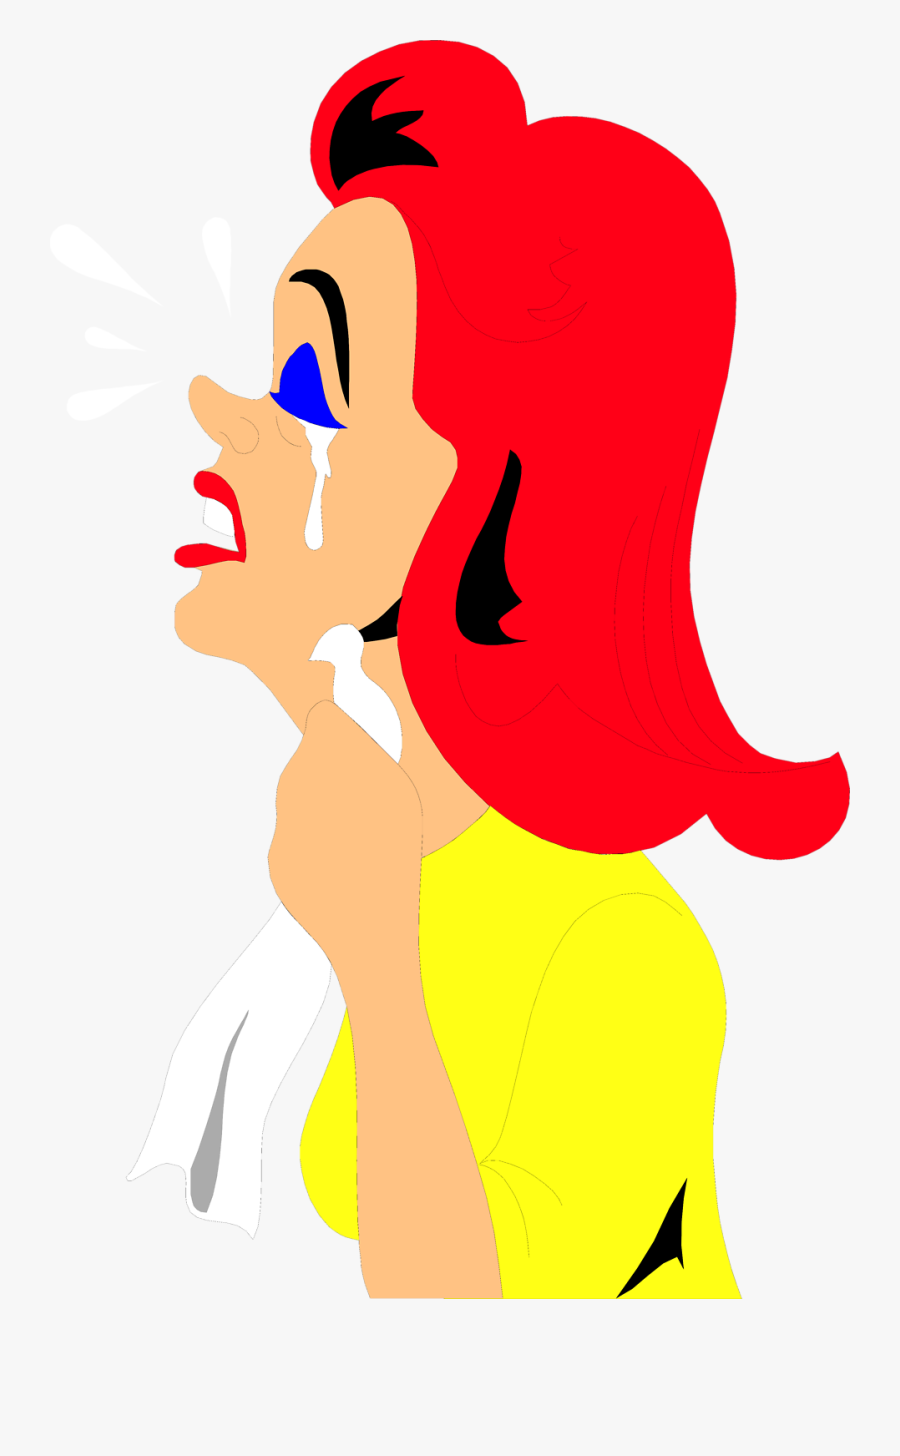 Crying Clipart Sad Lady - Woman Crying Clipart Gif, Transparent Clipart